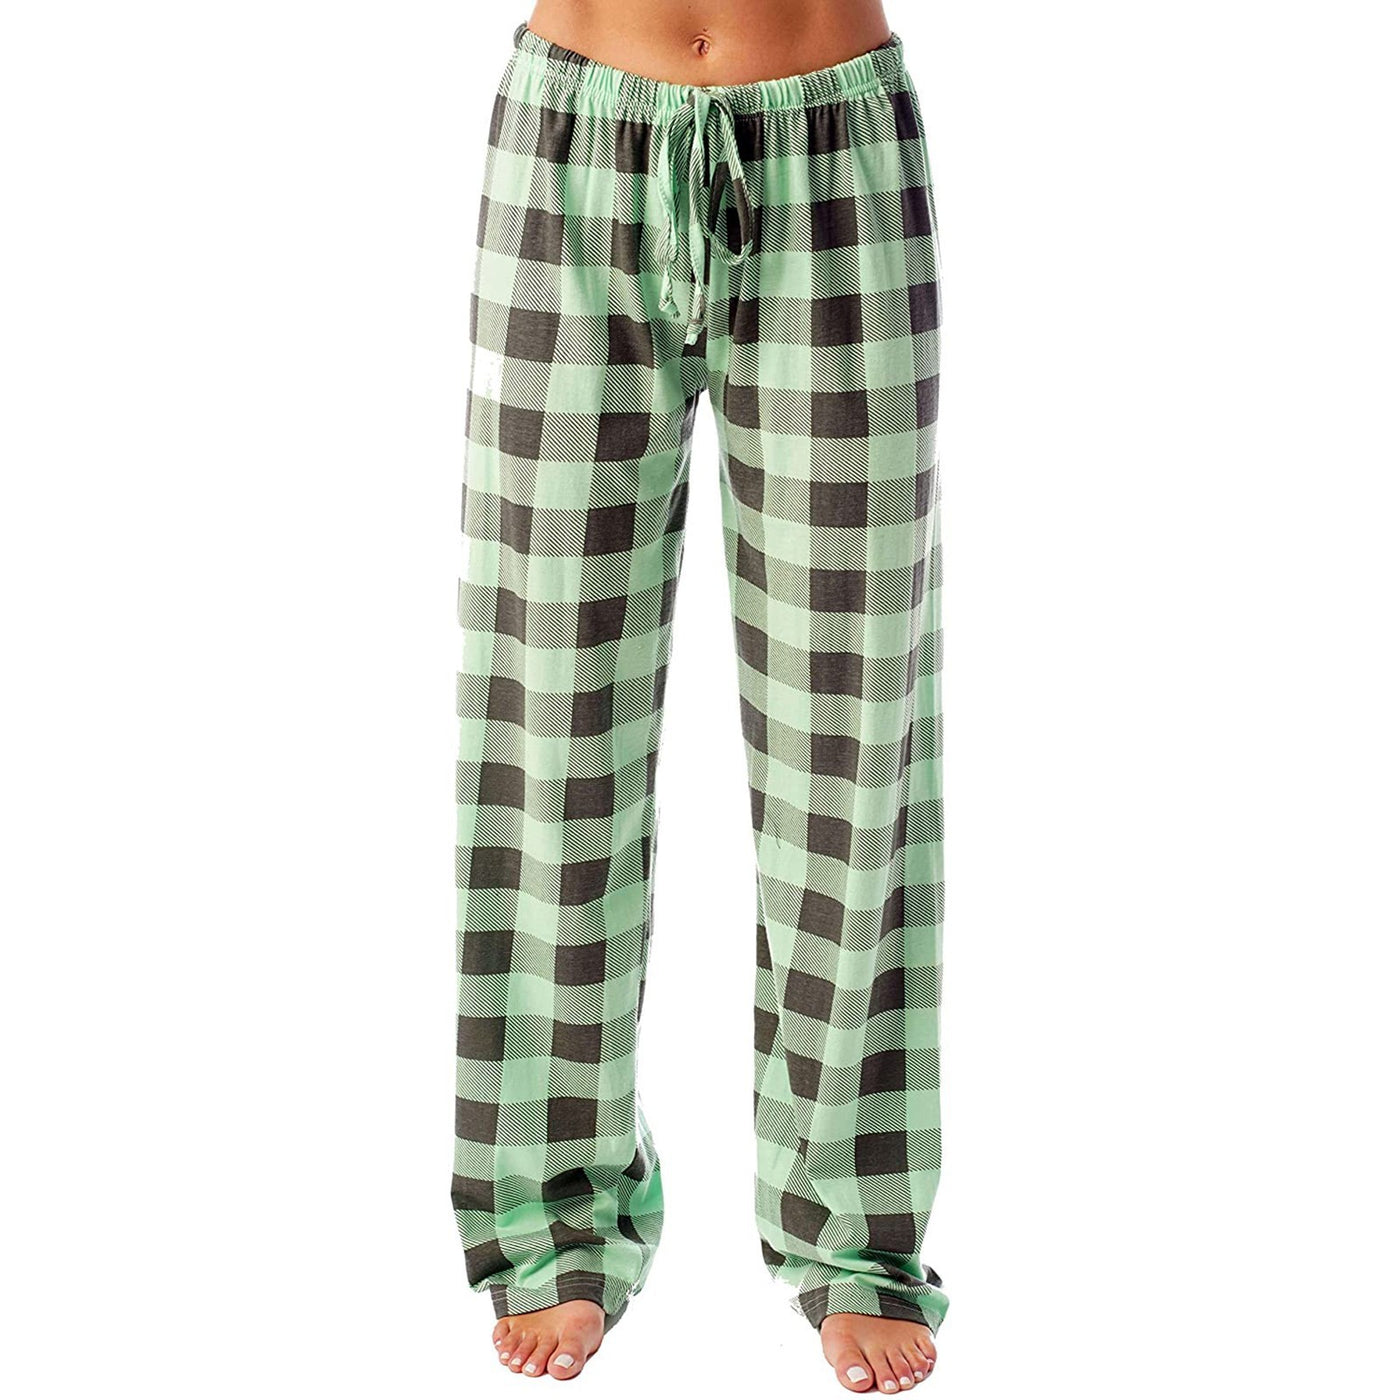 Trendy Checkered Pants for Casual Wear - Plaid Design - Carvan Mart